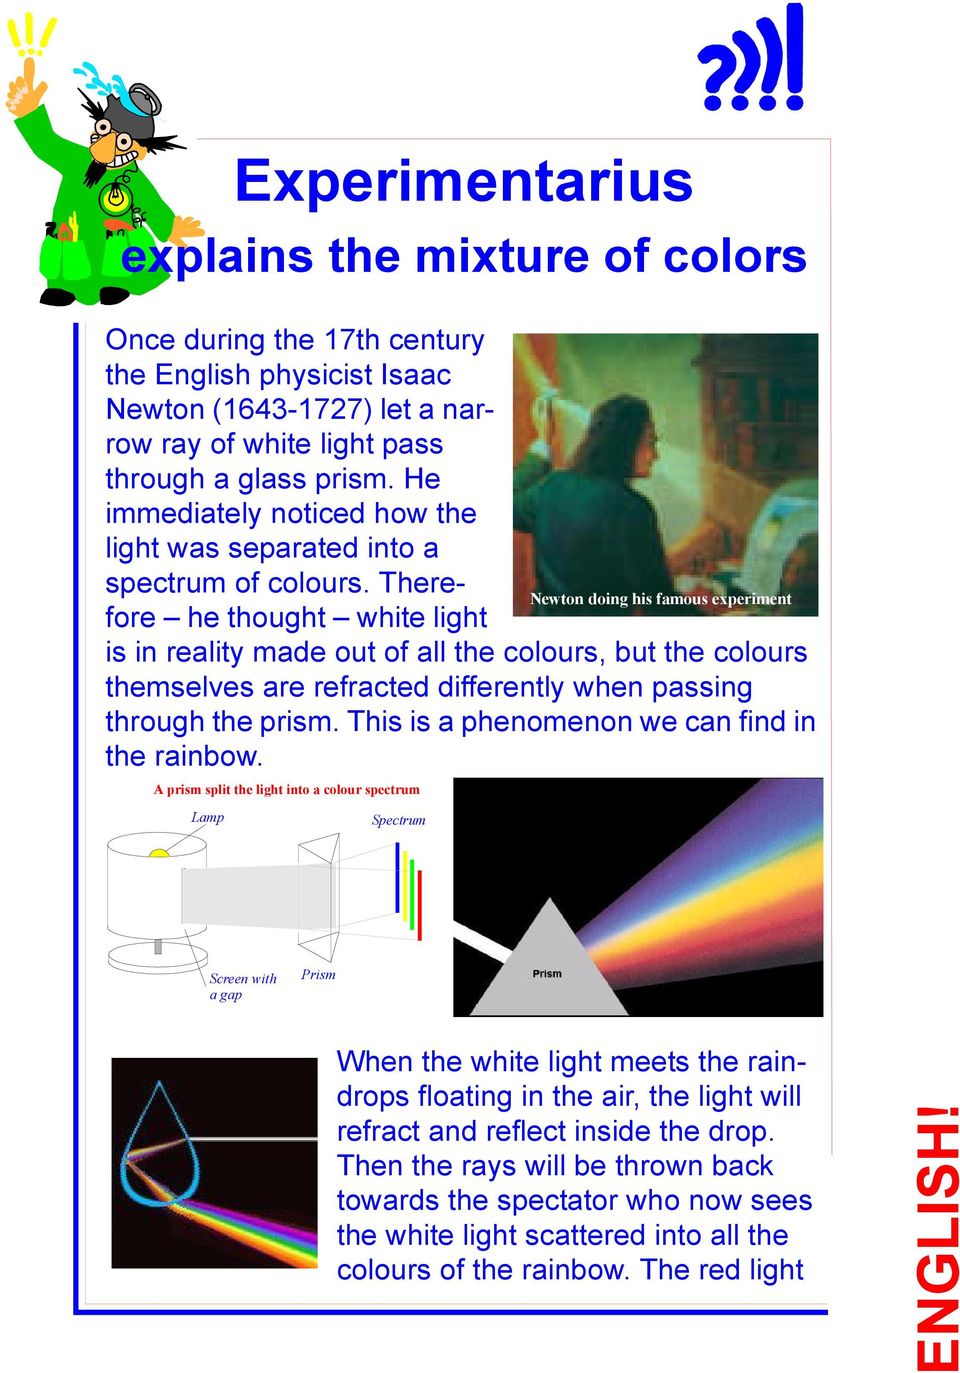 Therefore he thought white light ewton doing his famous experiment is in reality made out of all the colours, but the colours themselves are refracted differently when passing through the prism.